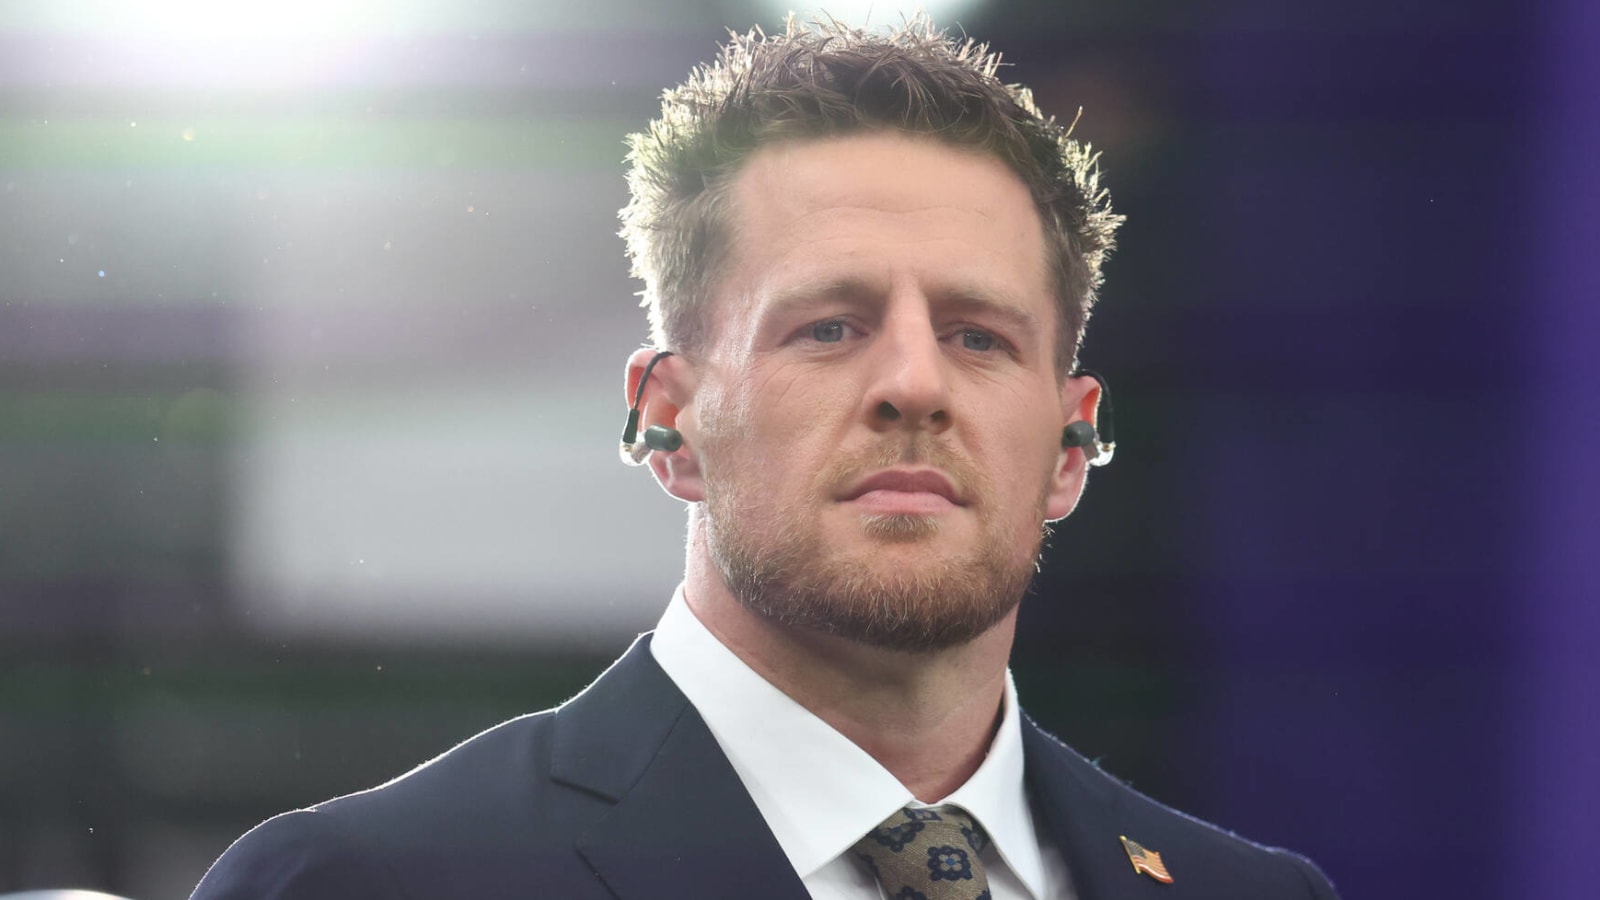 Watt responds to Rivers’ bold comment about NFL players